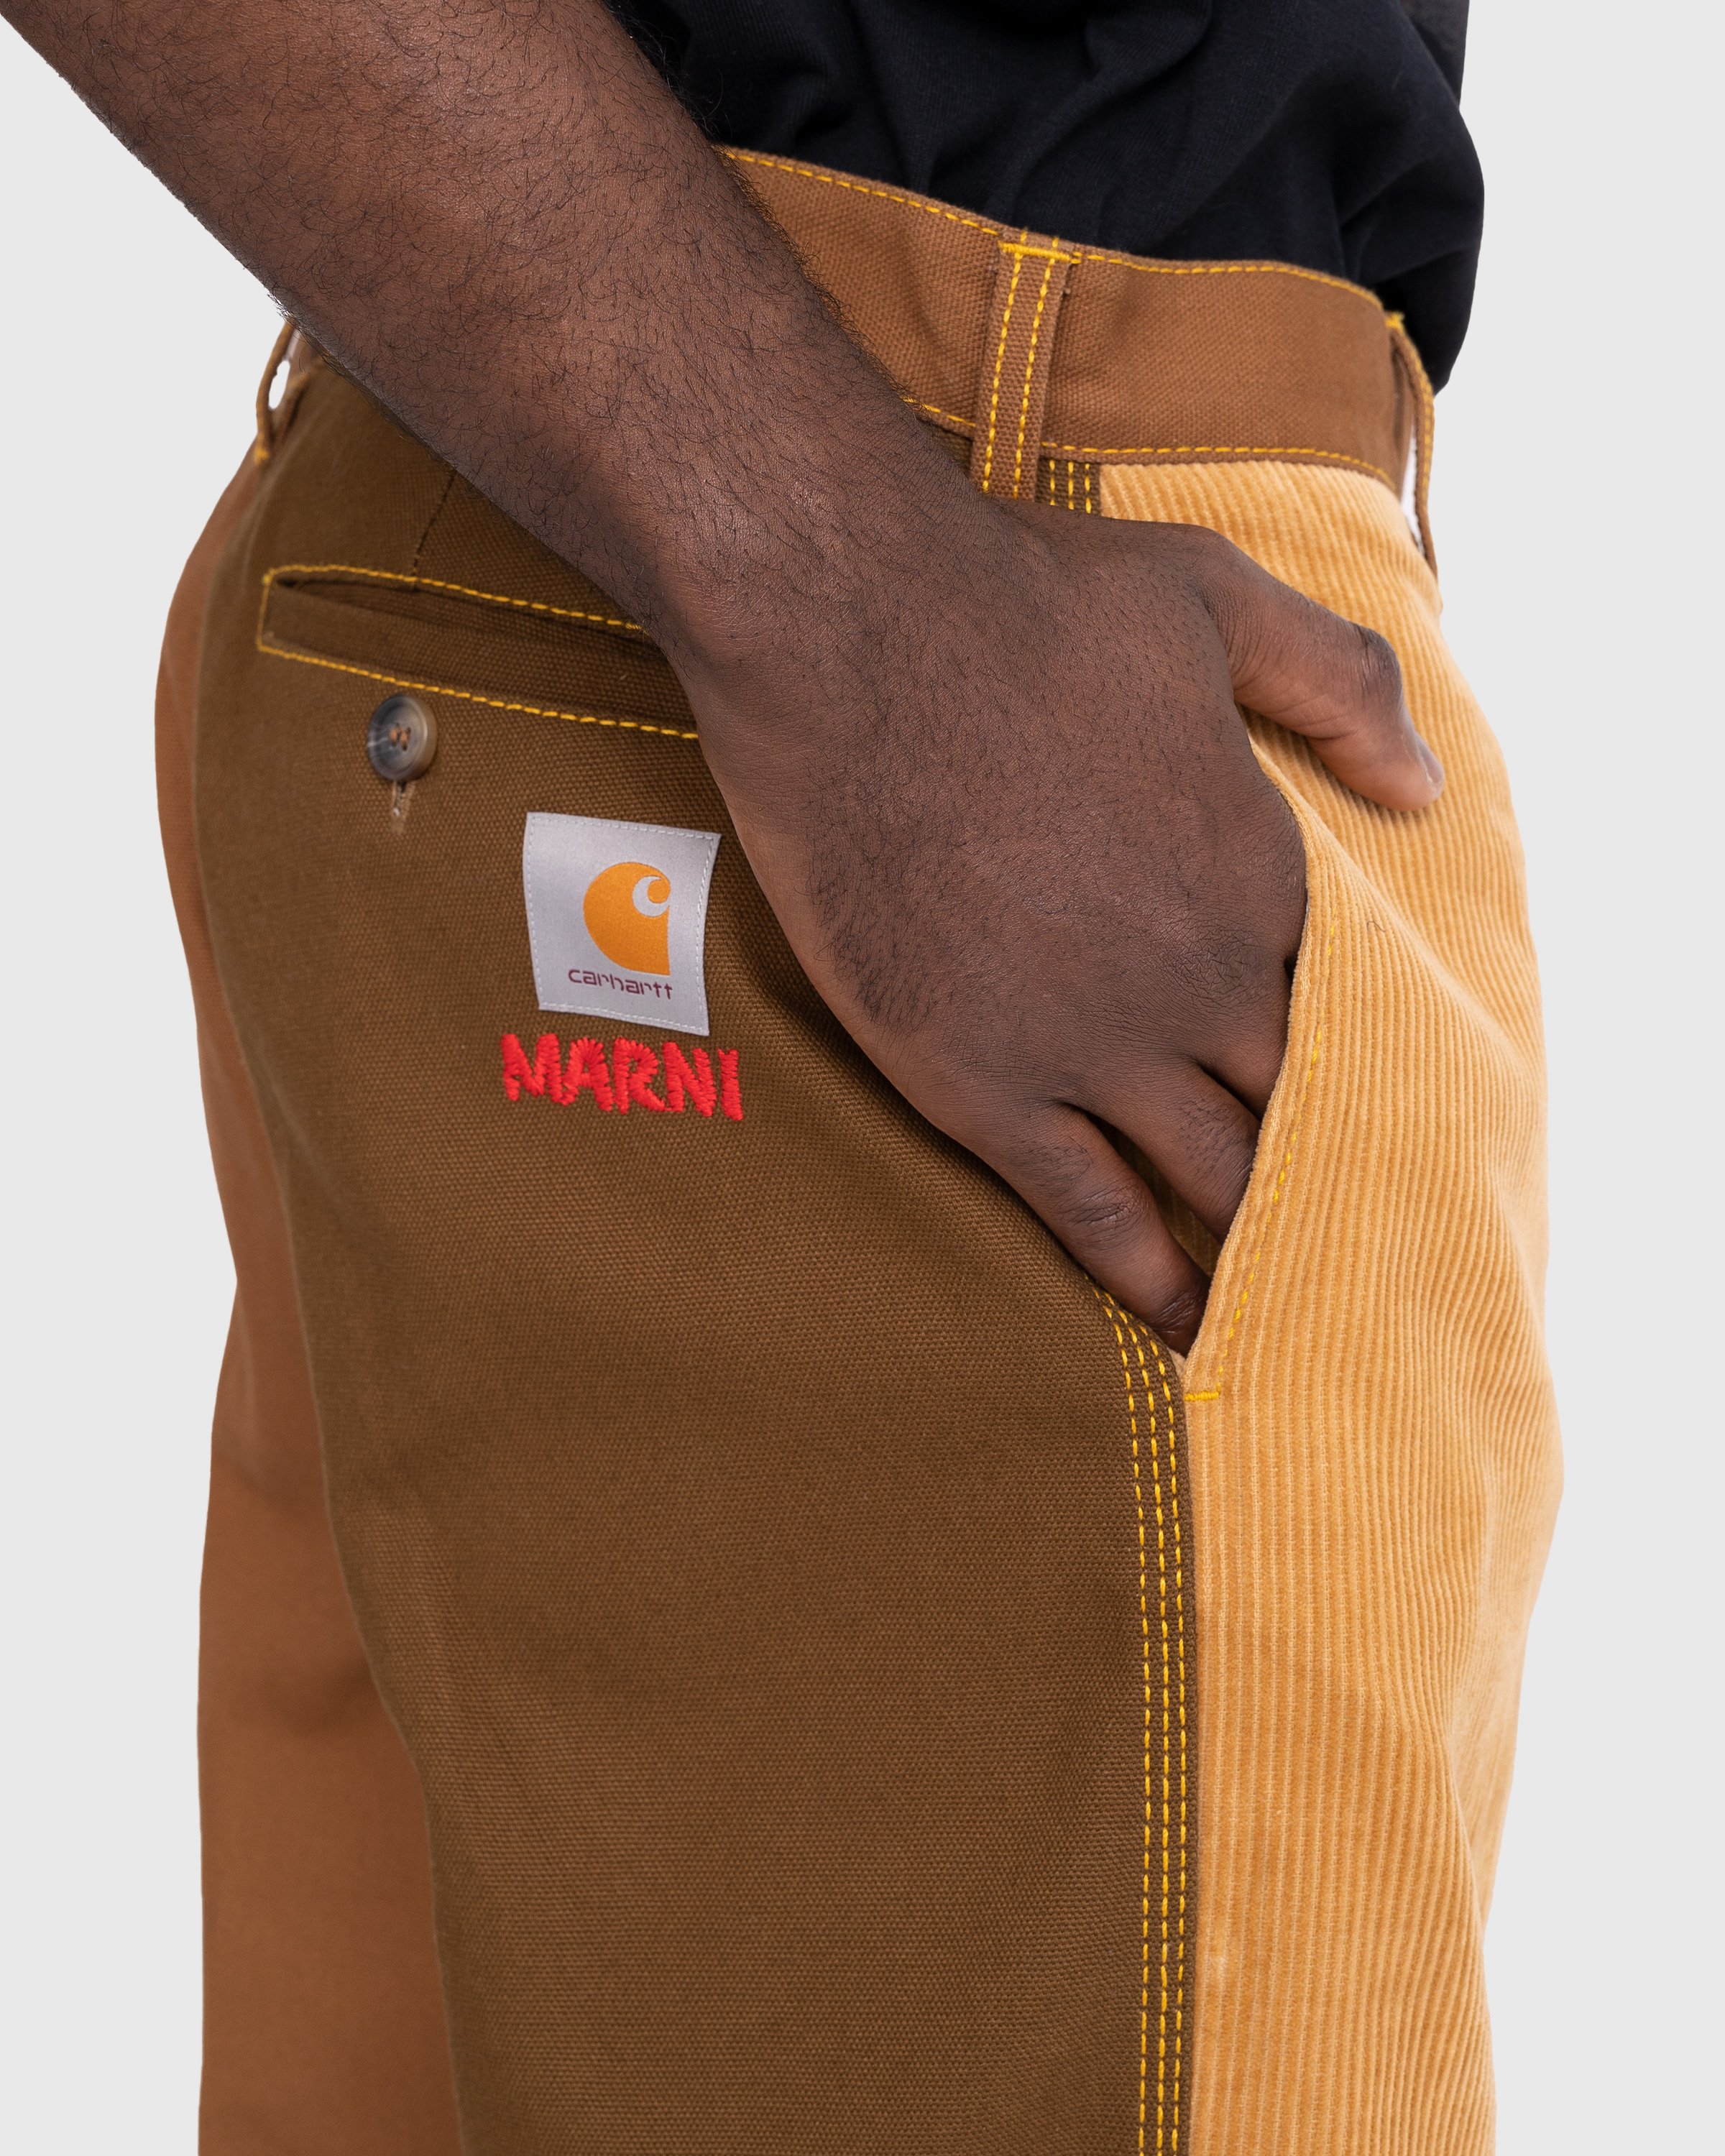 Marni x Carhartt WIP - Colorblocked Trousers Brown - Clothing - Brown - Image 5